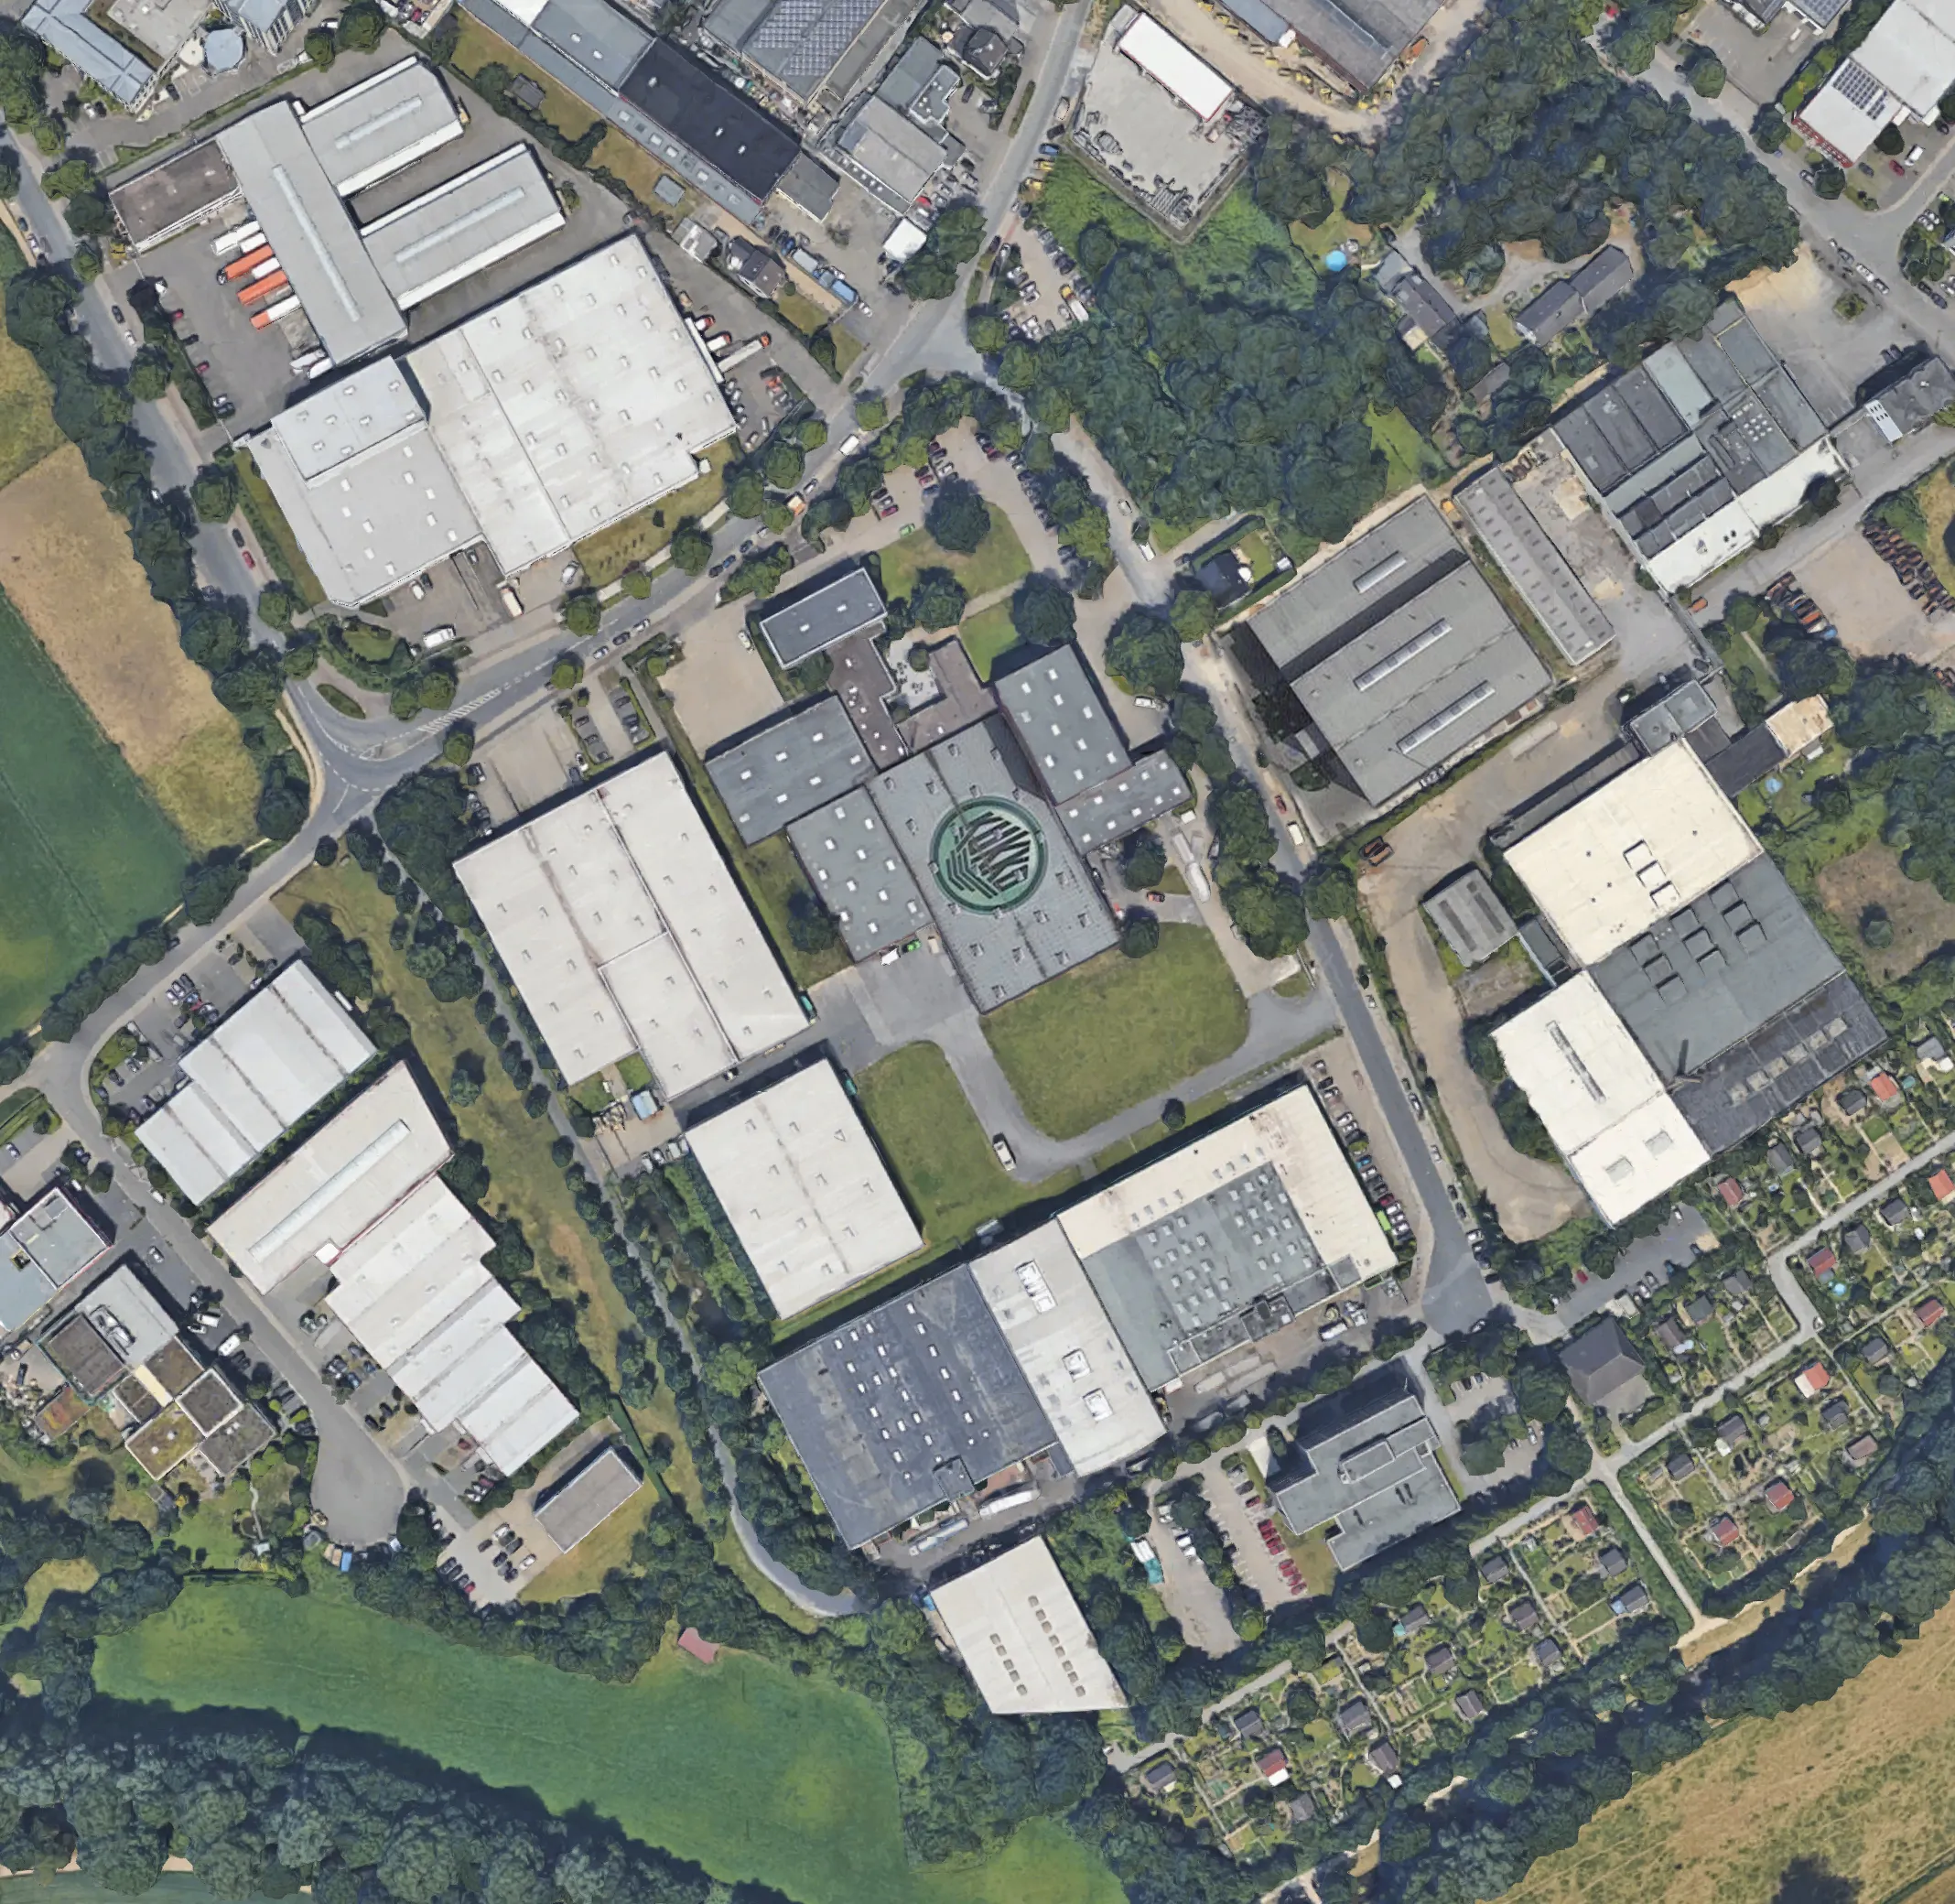 Bird's eye view of the Hilden plant